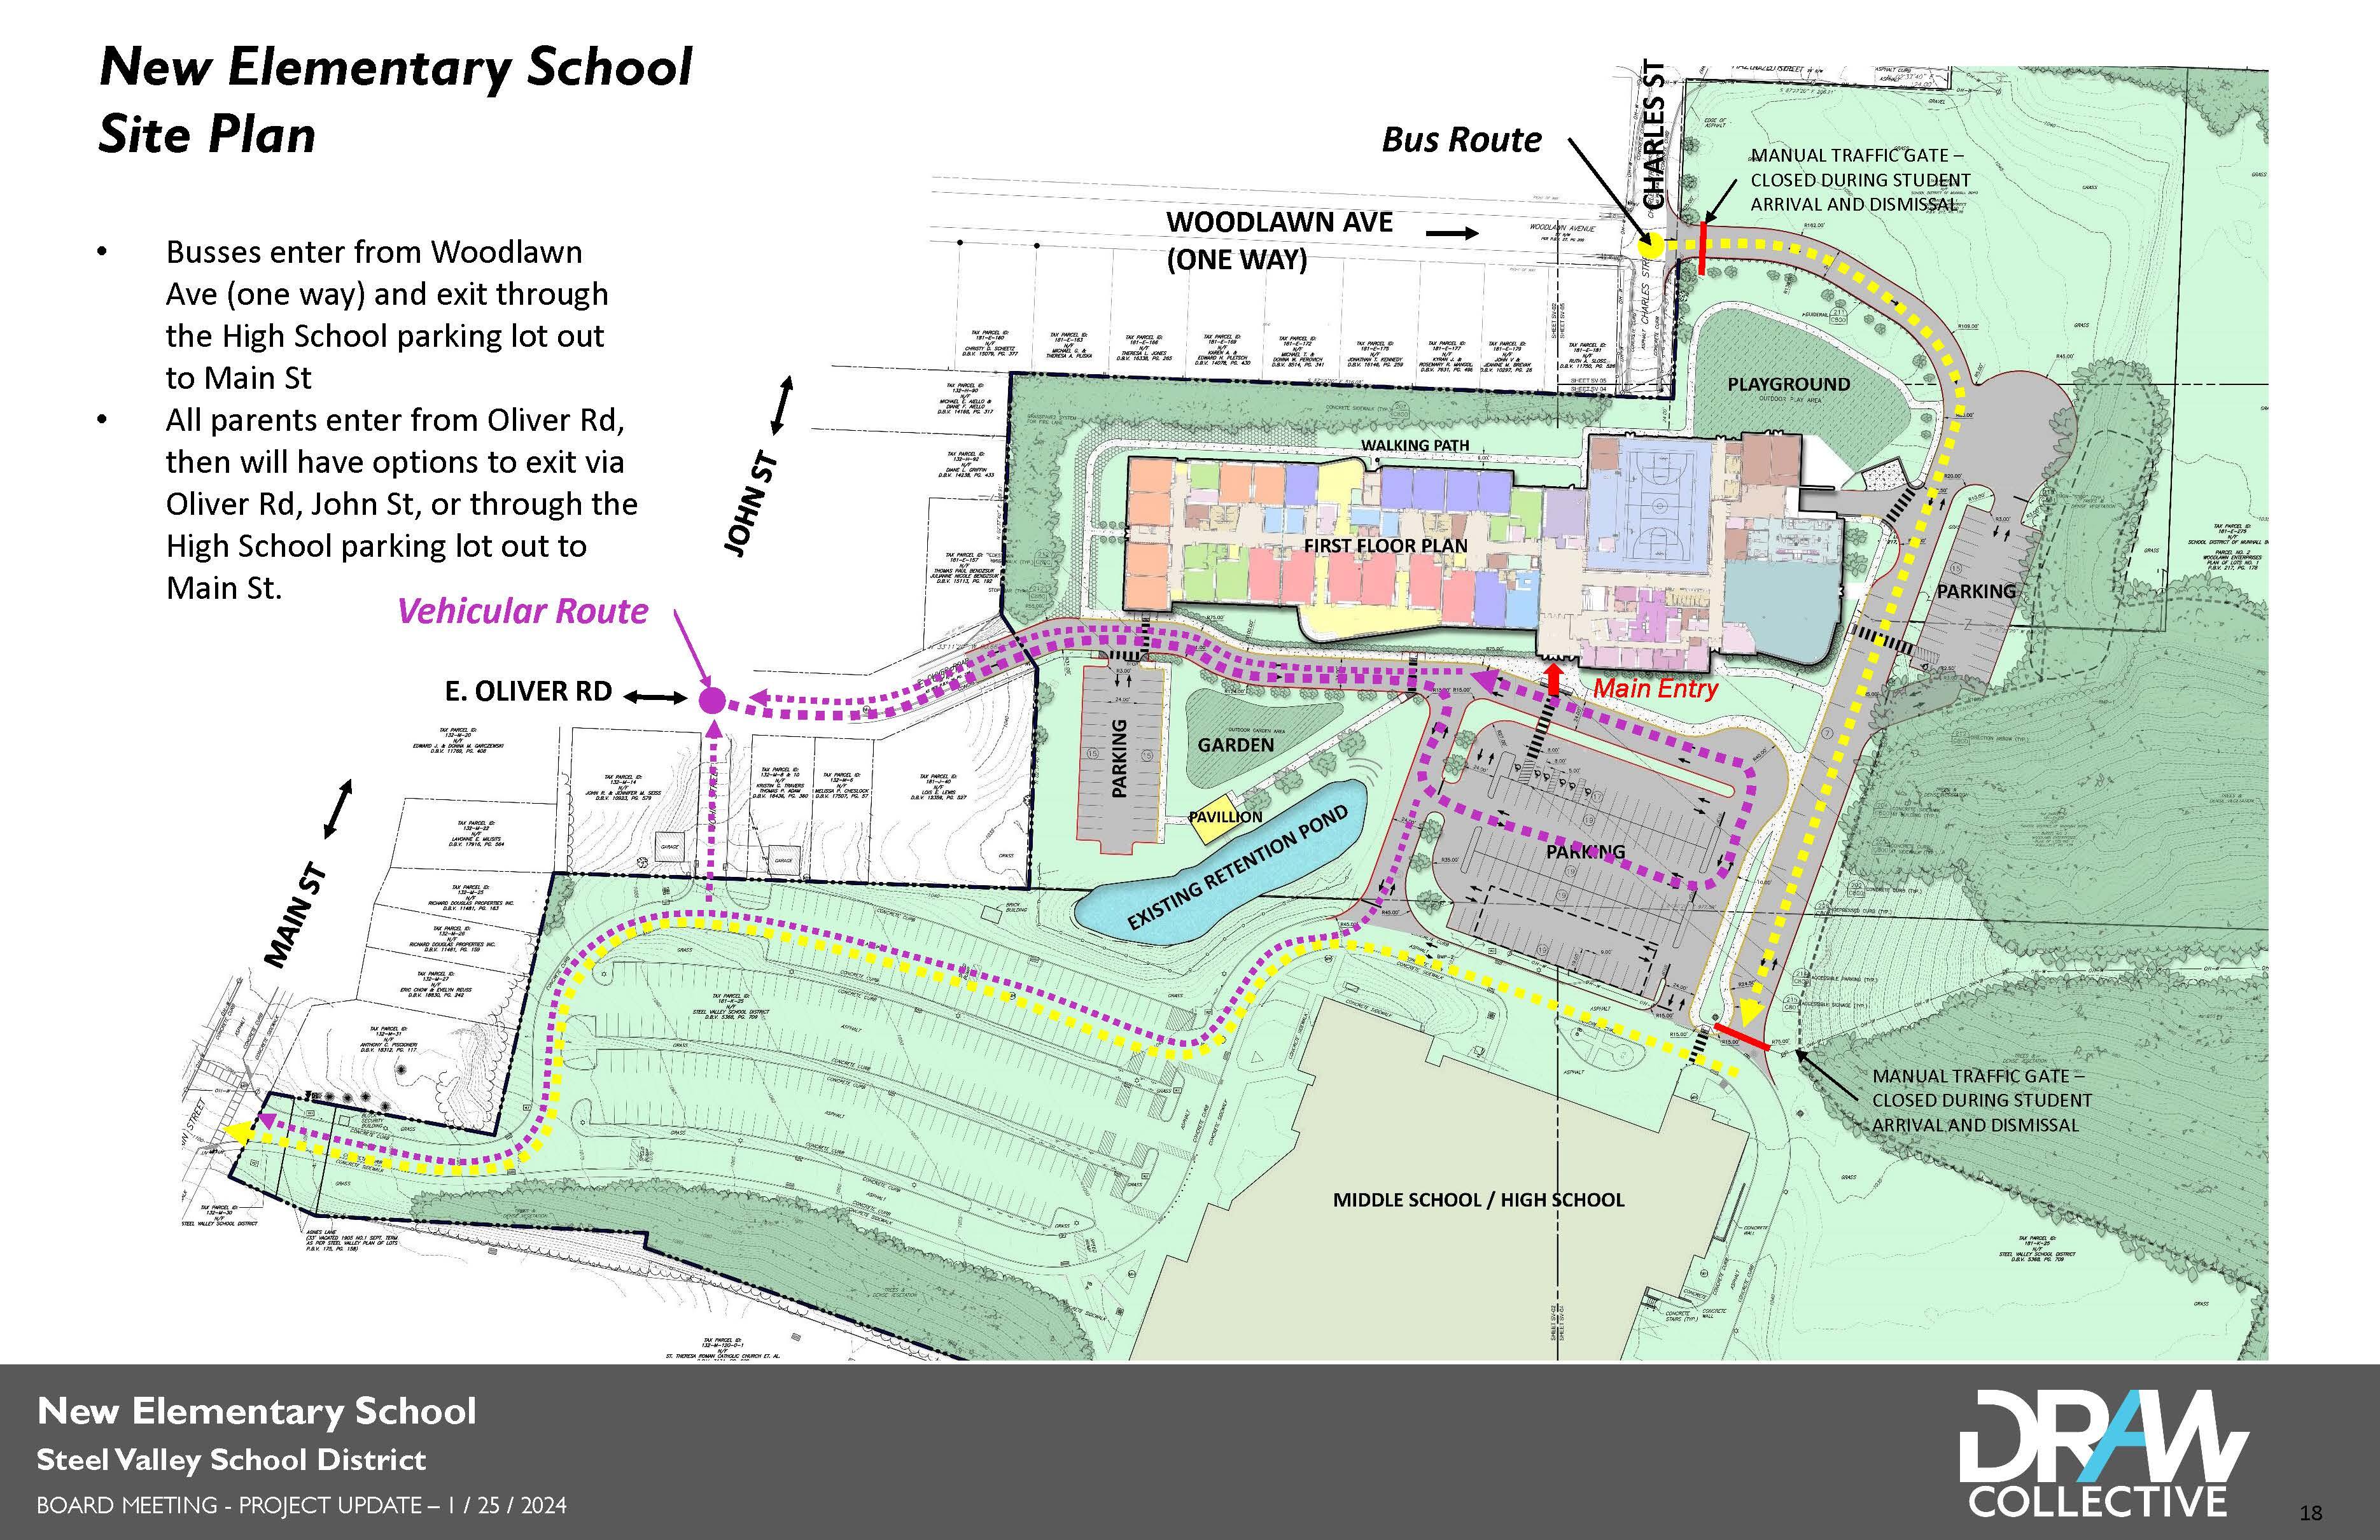 The proposed site plan and bus routes